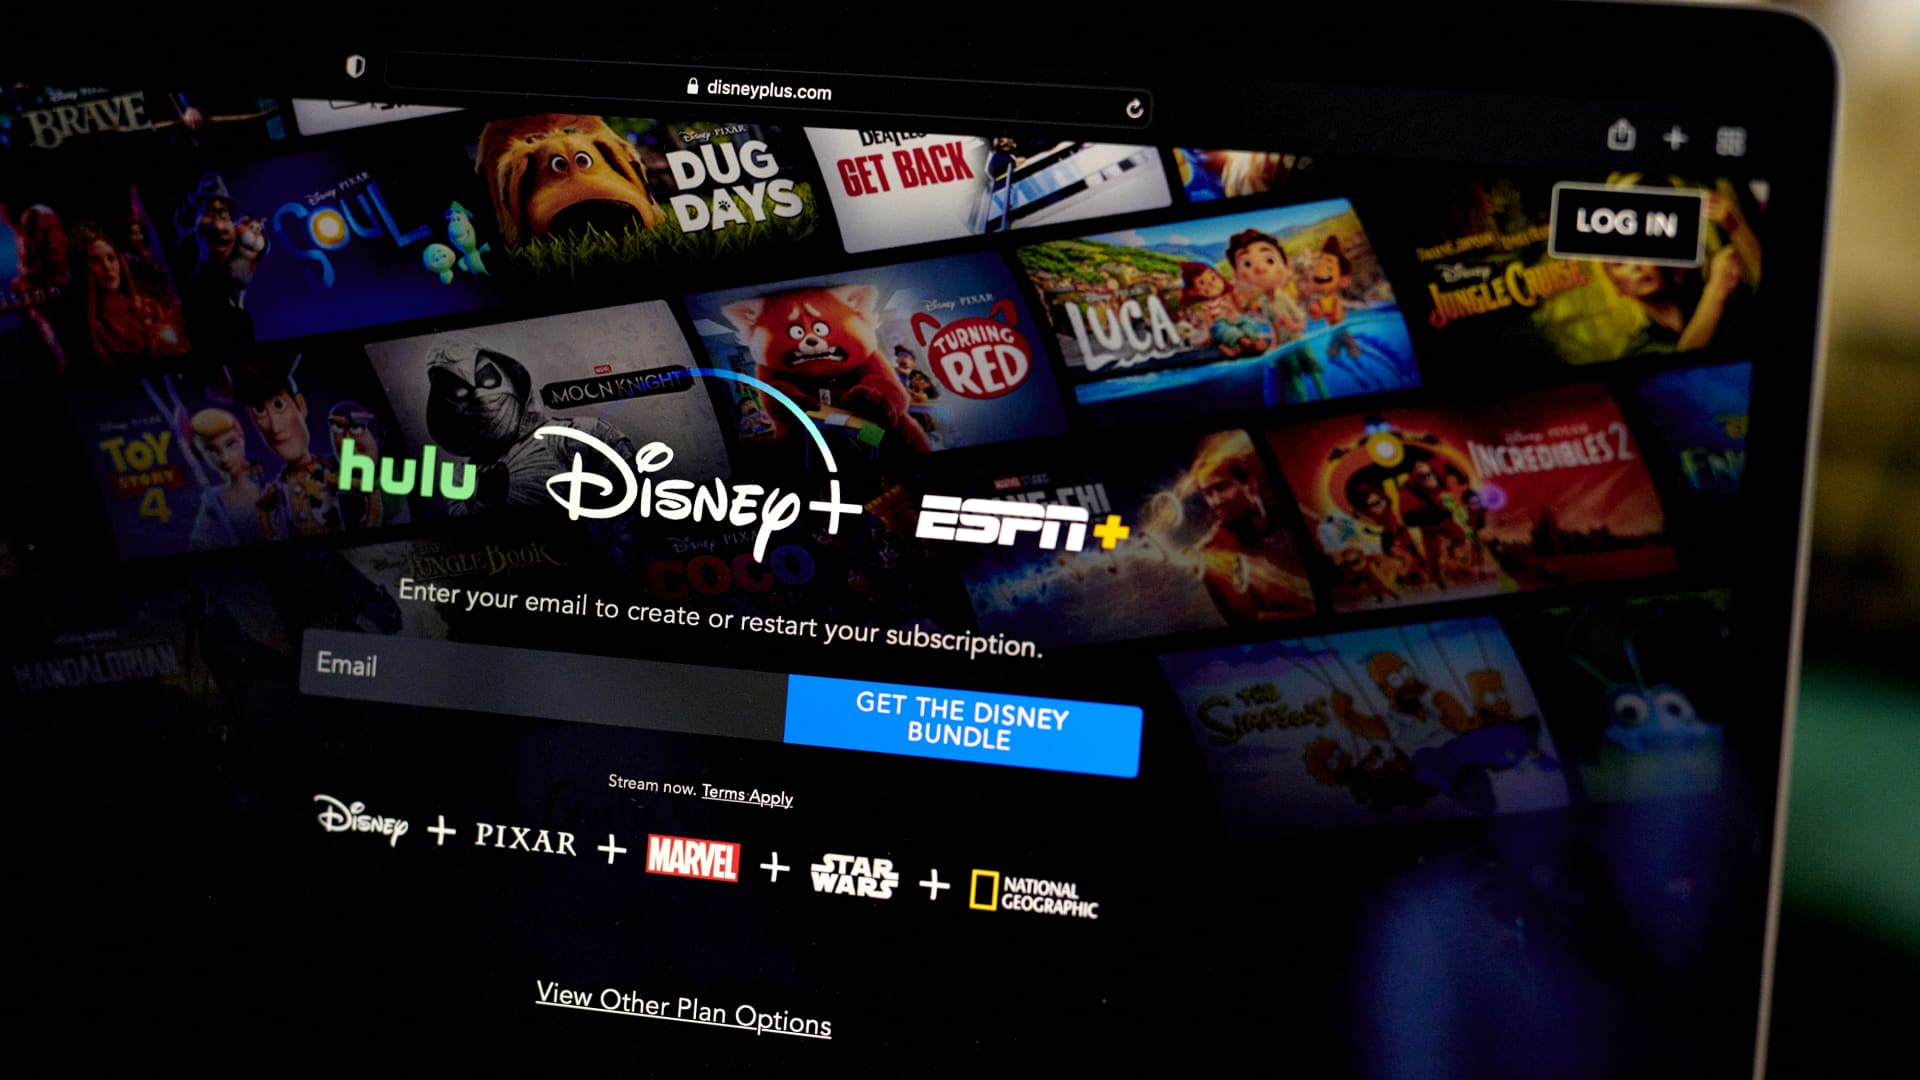 Streaming bundles are forming, but don’t expect a cable TV-like package any time soon